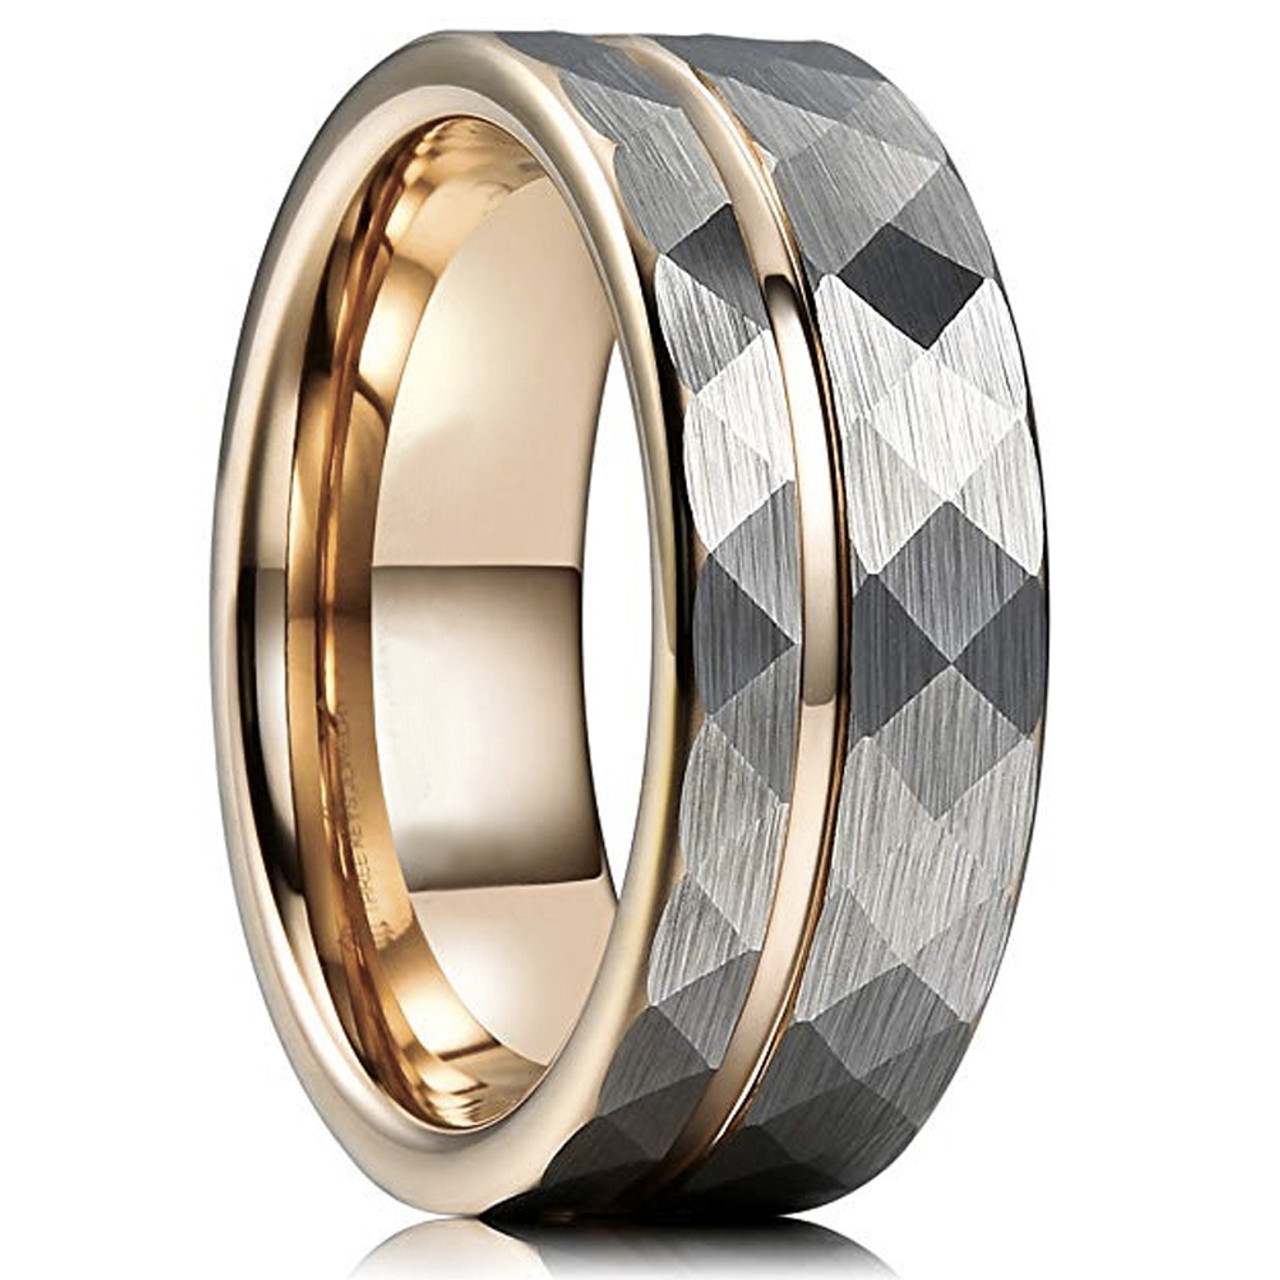 (8mm)  Unisex or Men's Tungsten Carbide Wedding ring band. Hammered Brushed Silver Tungsten Carbide Ring with Rose Gold Interior and Stripe Design